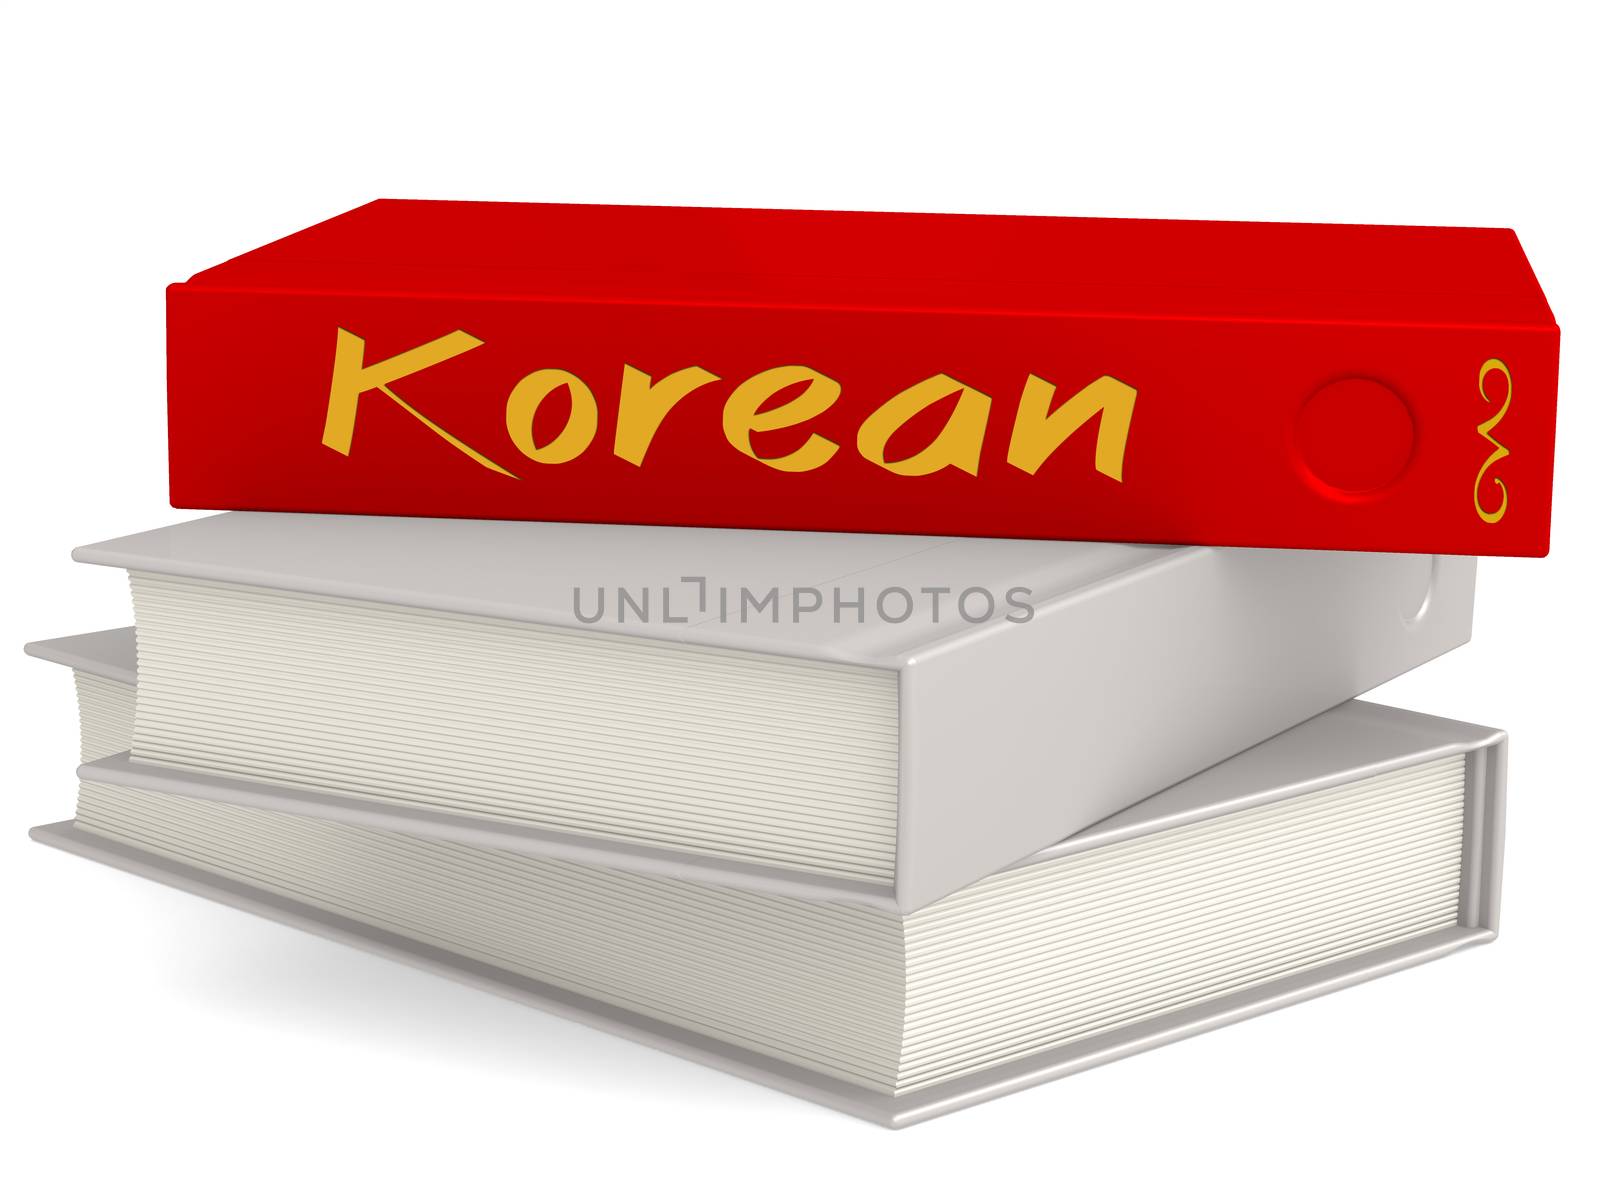 Hard cover books with Korean word by tang90246